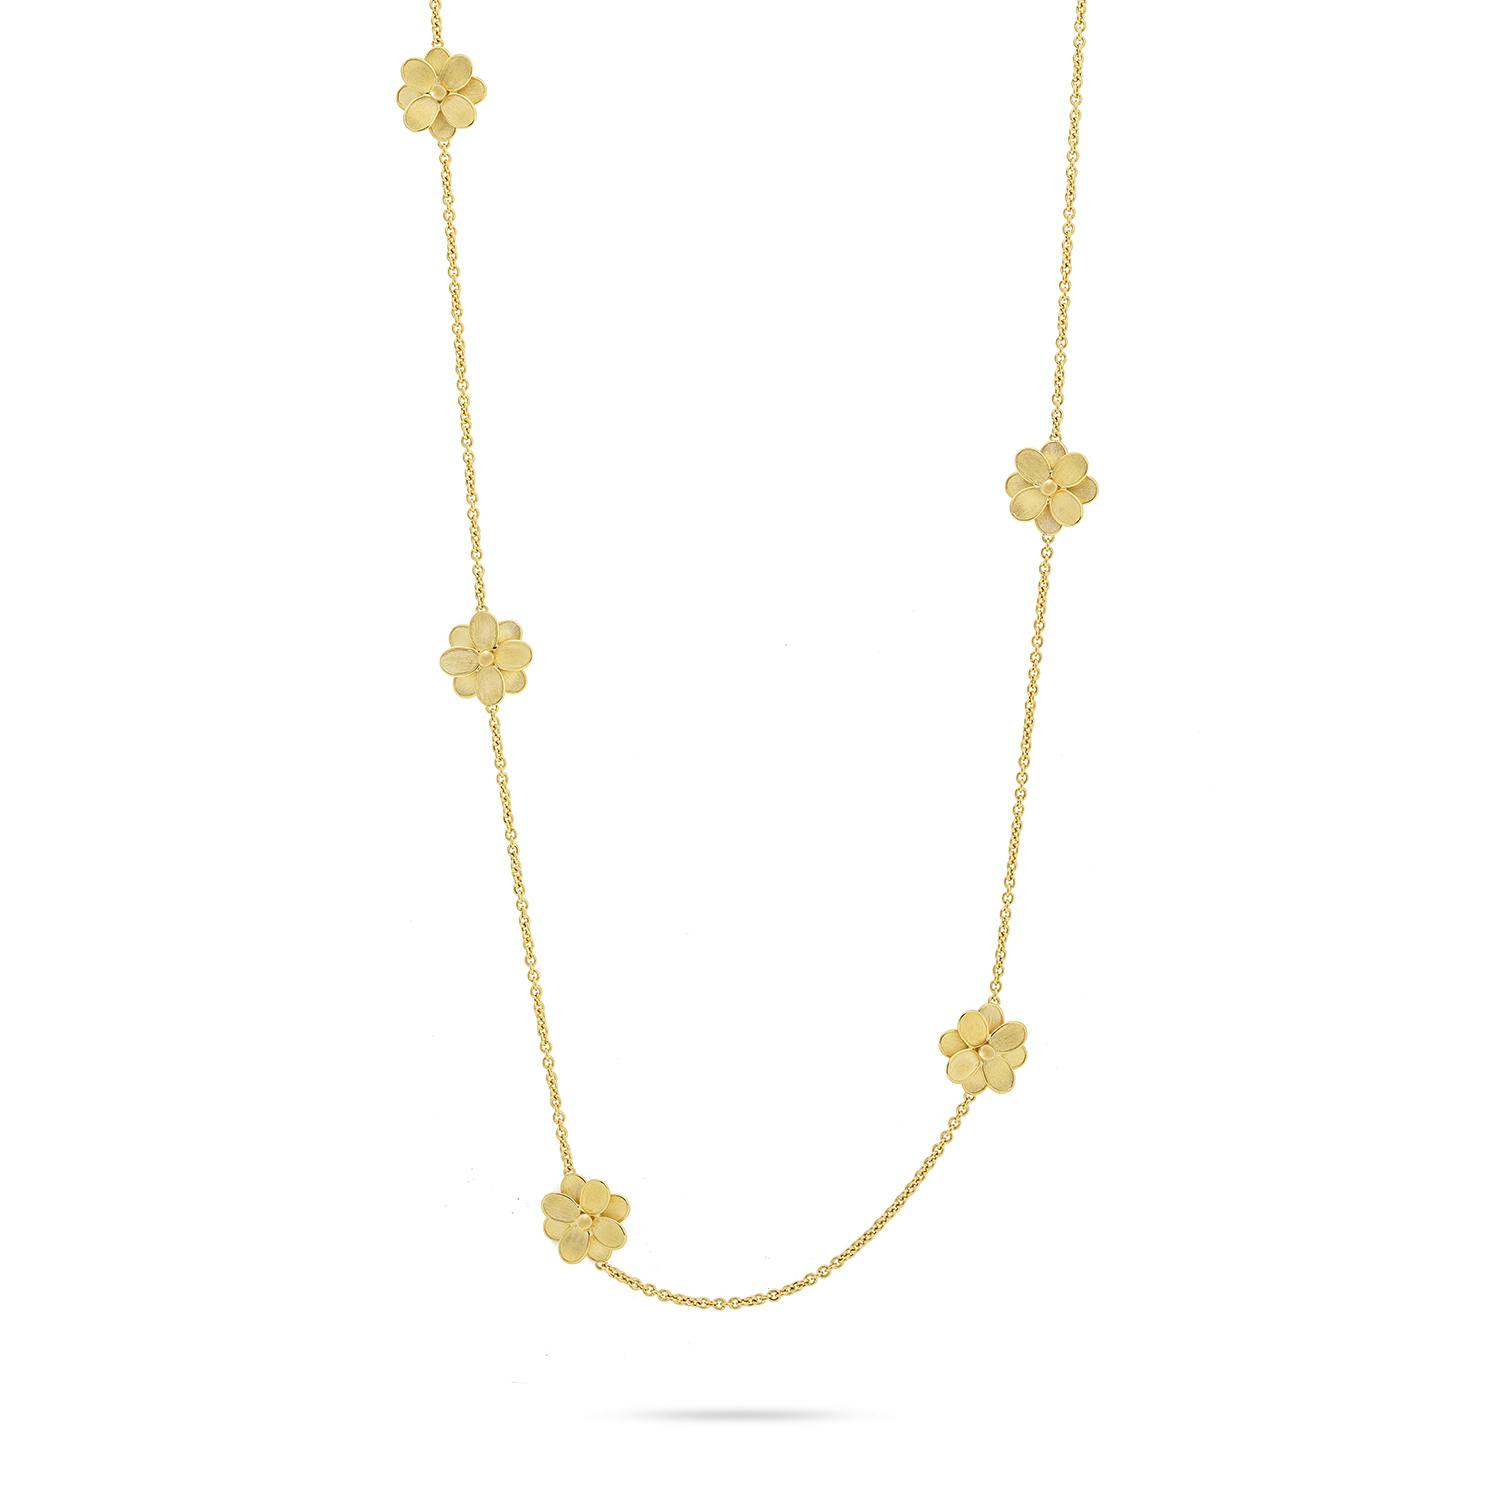 Marco Bicego Yellow Gold Lunaria Petali 36 inch Flower Station Necklace 0